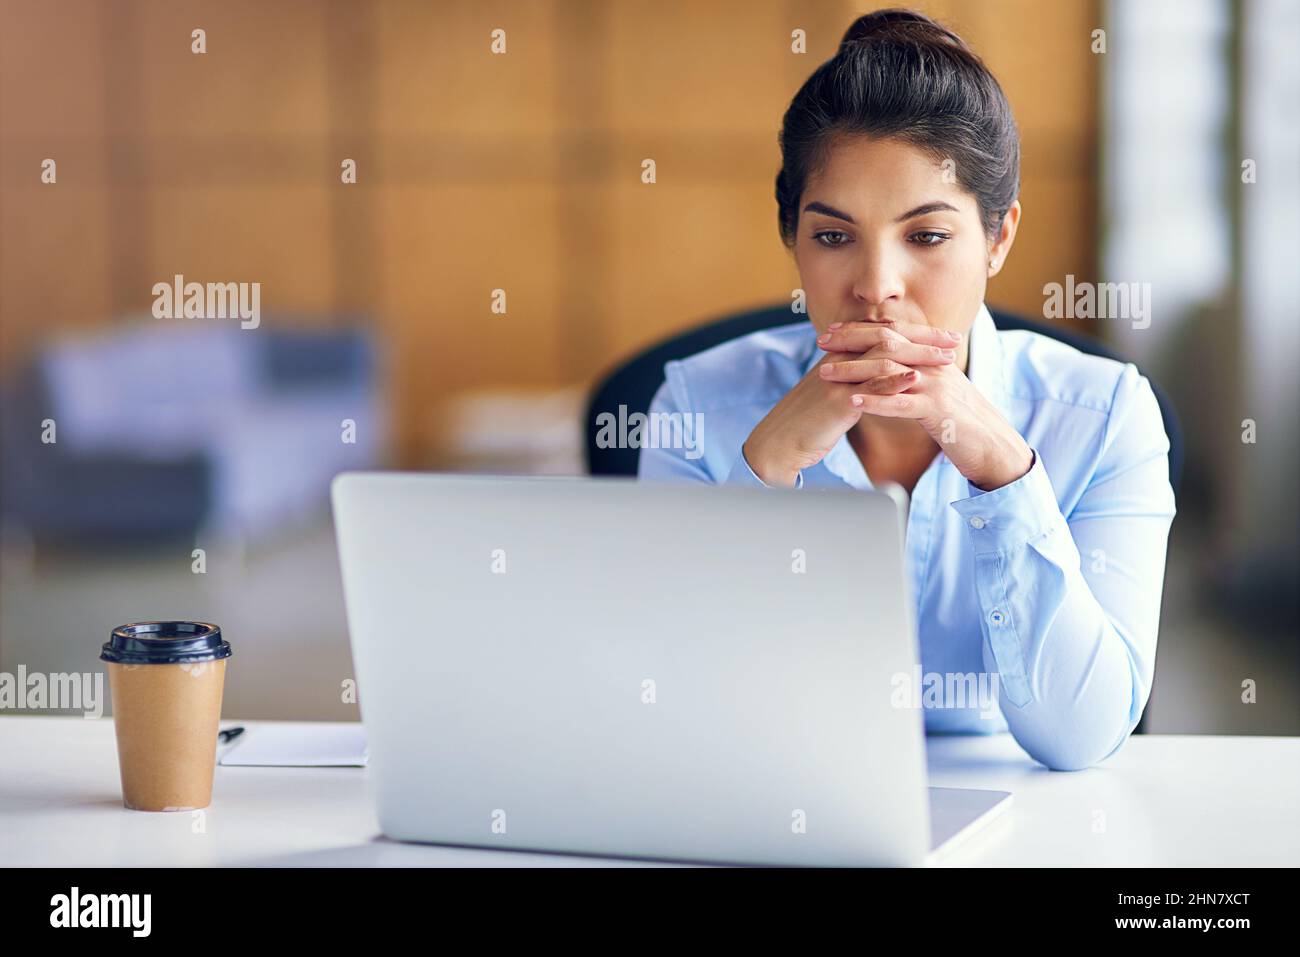 The deadline is looming.... Shot of a young businesswoman looking stressed while working at her desk. Stock Photo